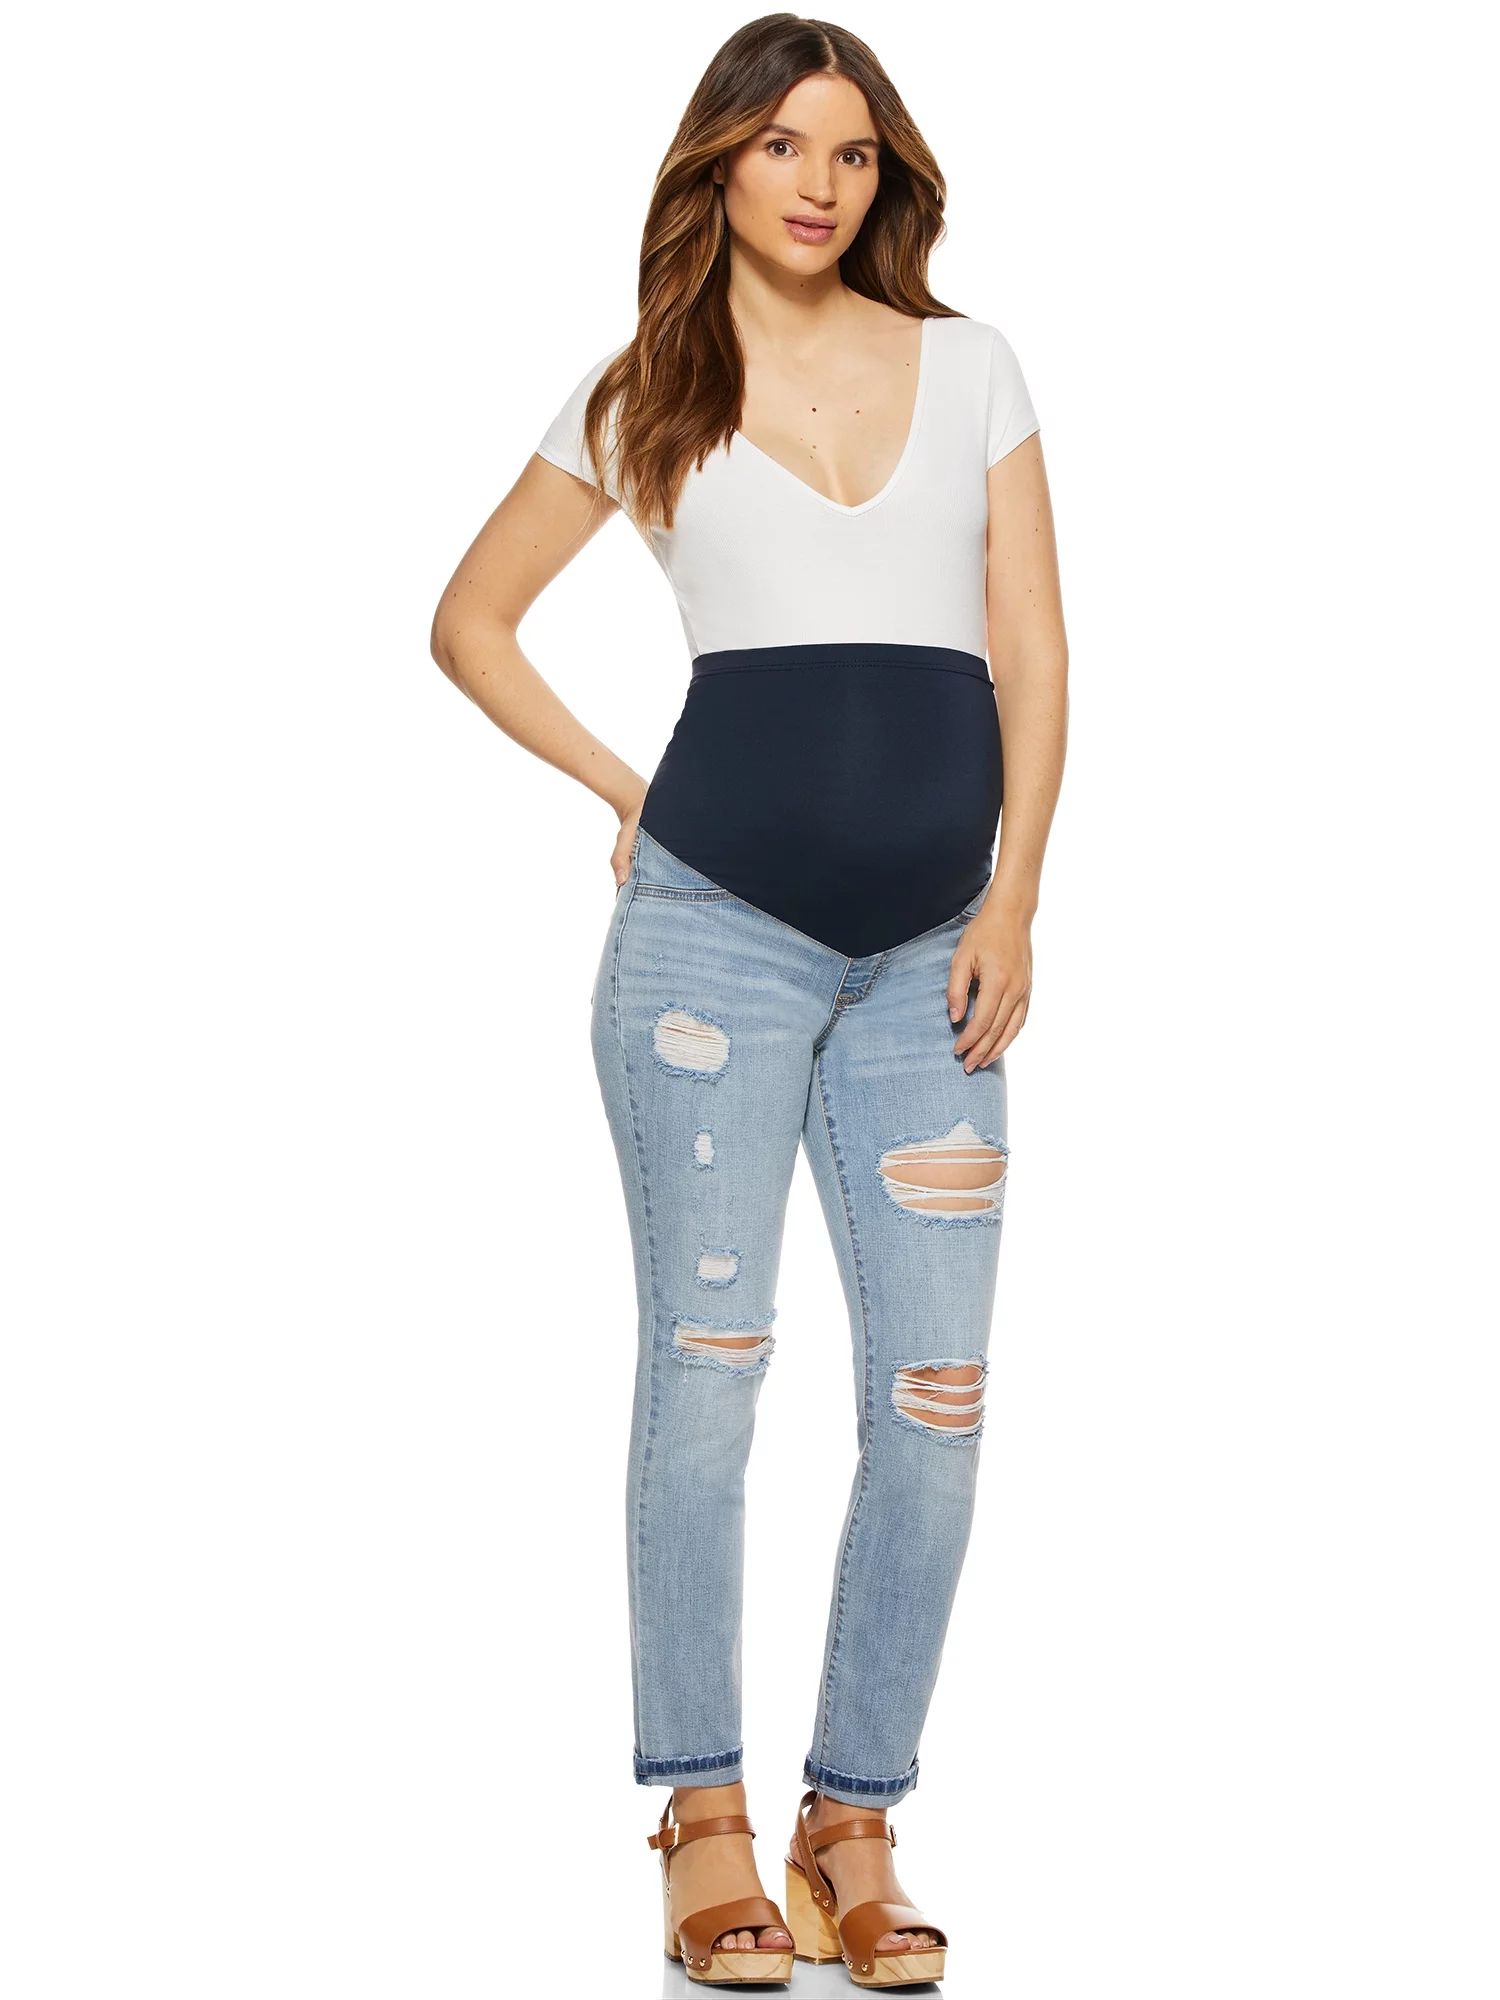 Sofia Jeans by Sofia Vergara Women's Maternity Bagi Jeans with Full Belly Band | Walmart (US)